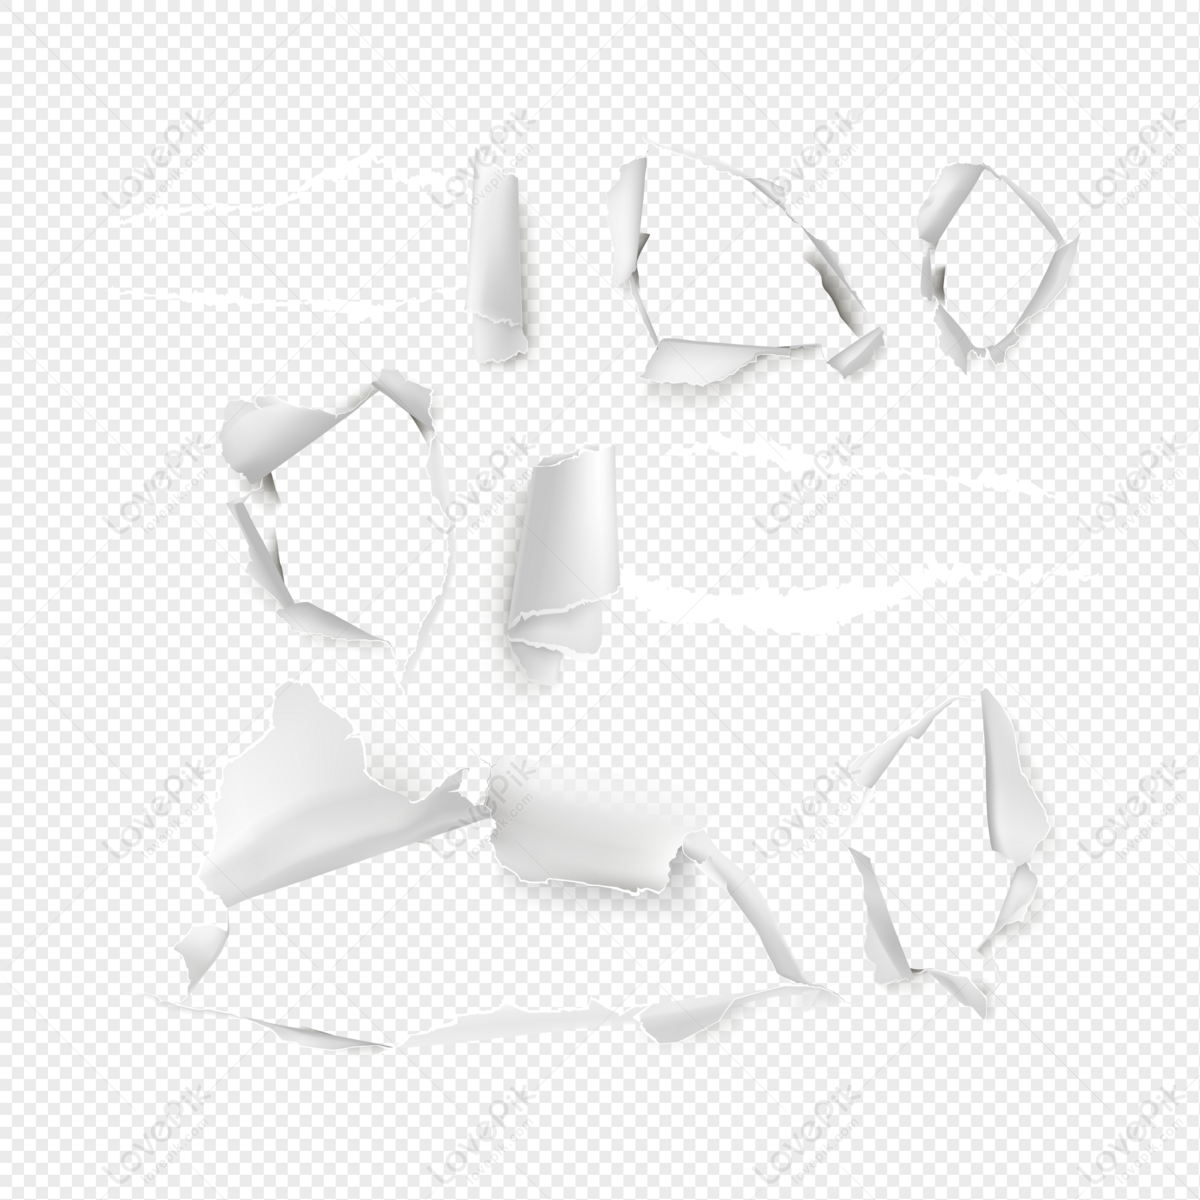 Ripped Paper Frame Vector Design Images, Rip White Paper Frame, Rip Paper,  Tear Paper, White Paper Corner PNG Image For Free Download in 2023